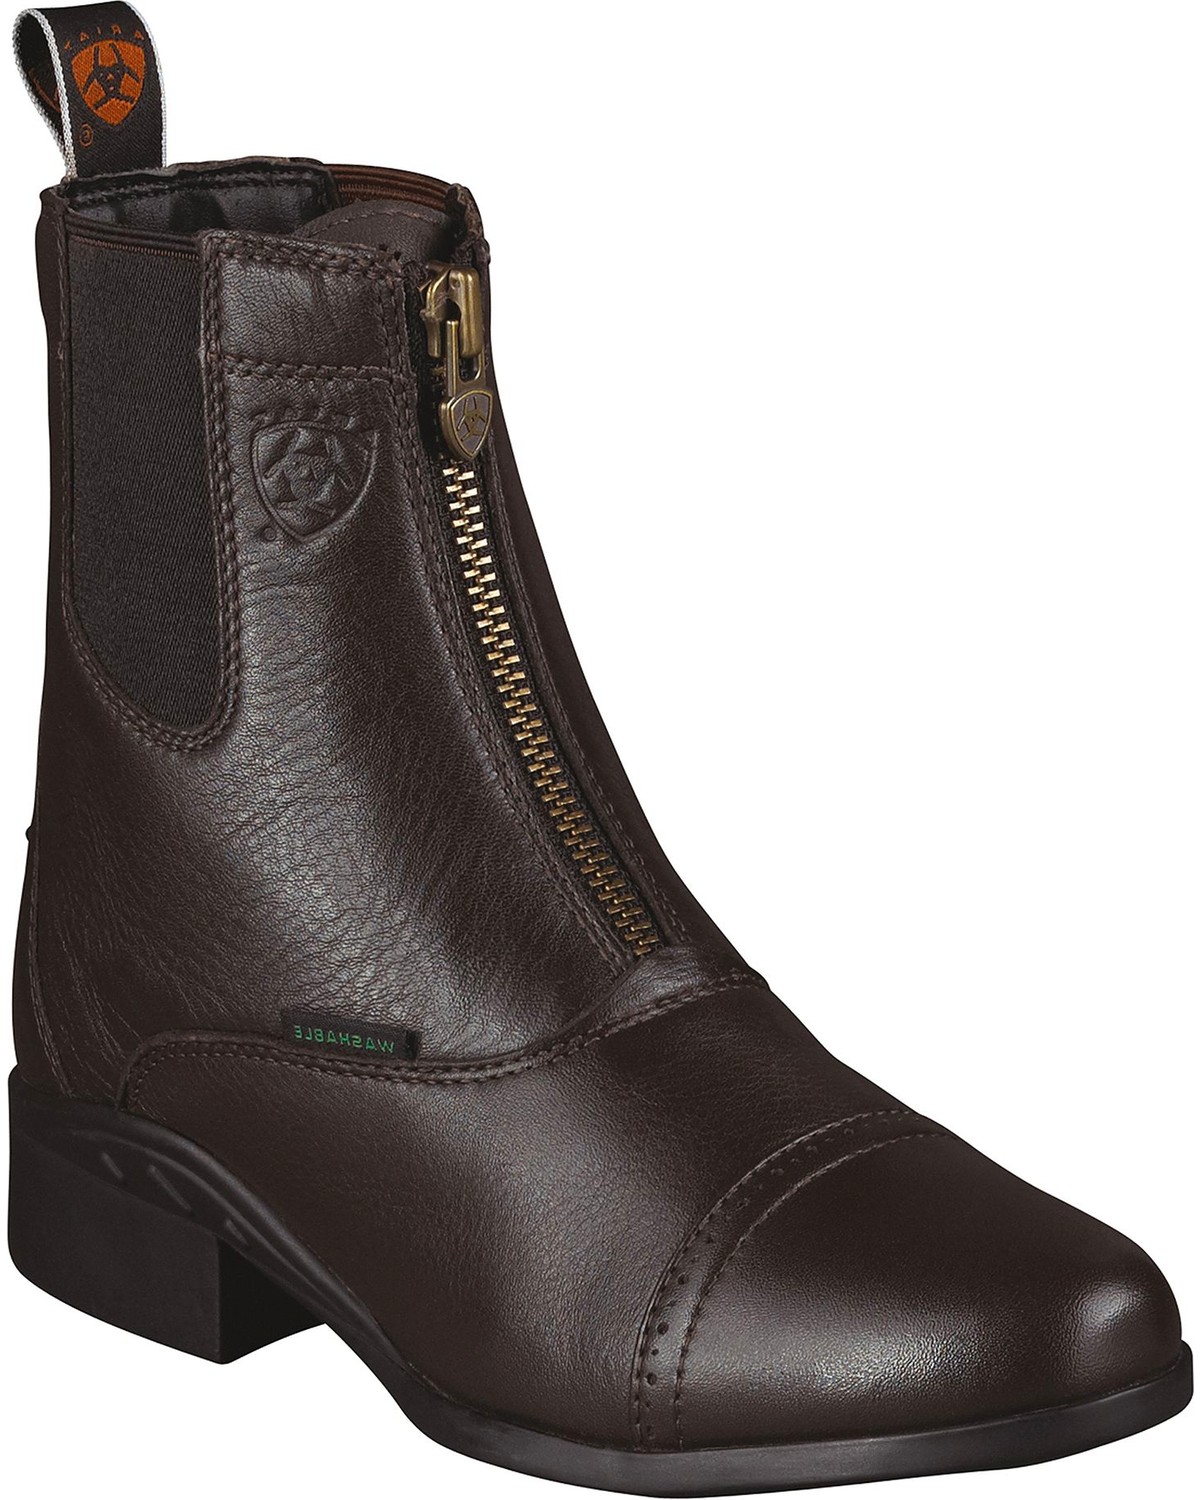 round toe riding boots